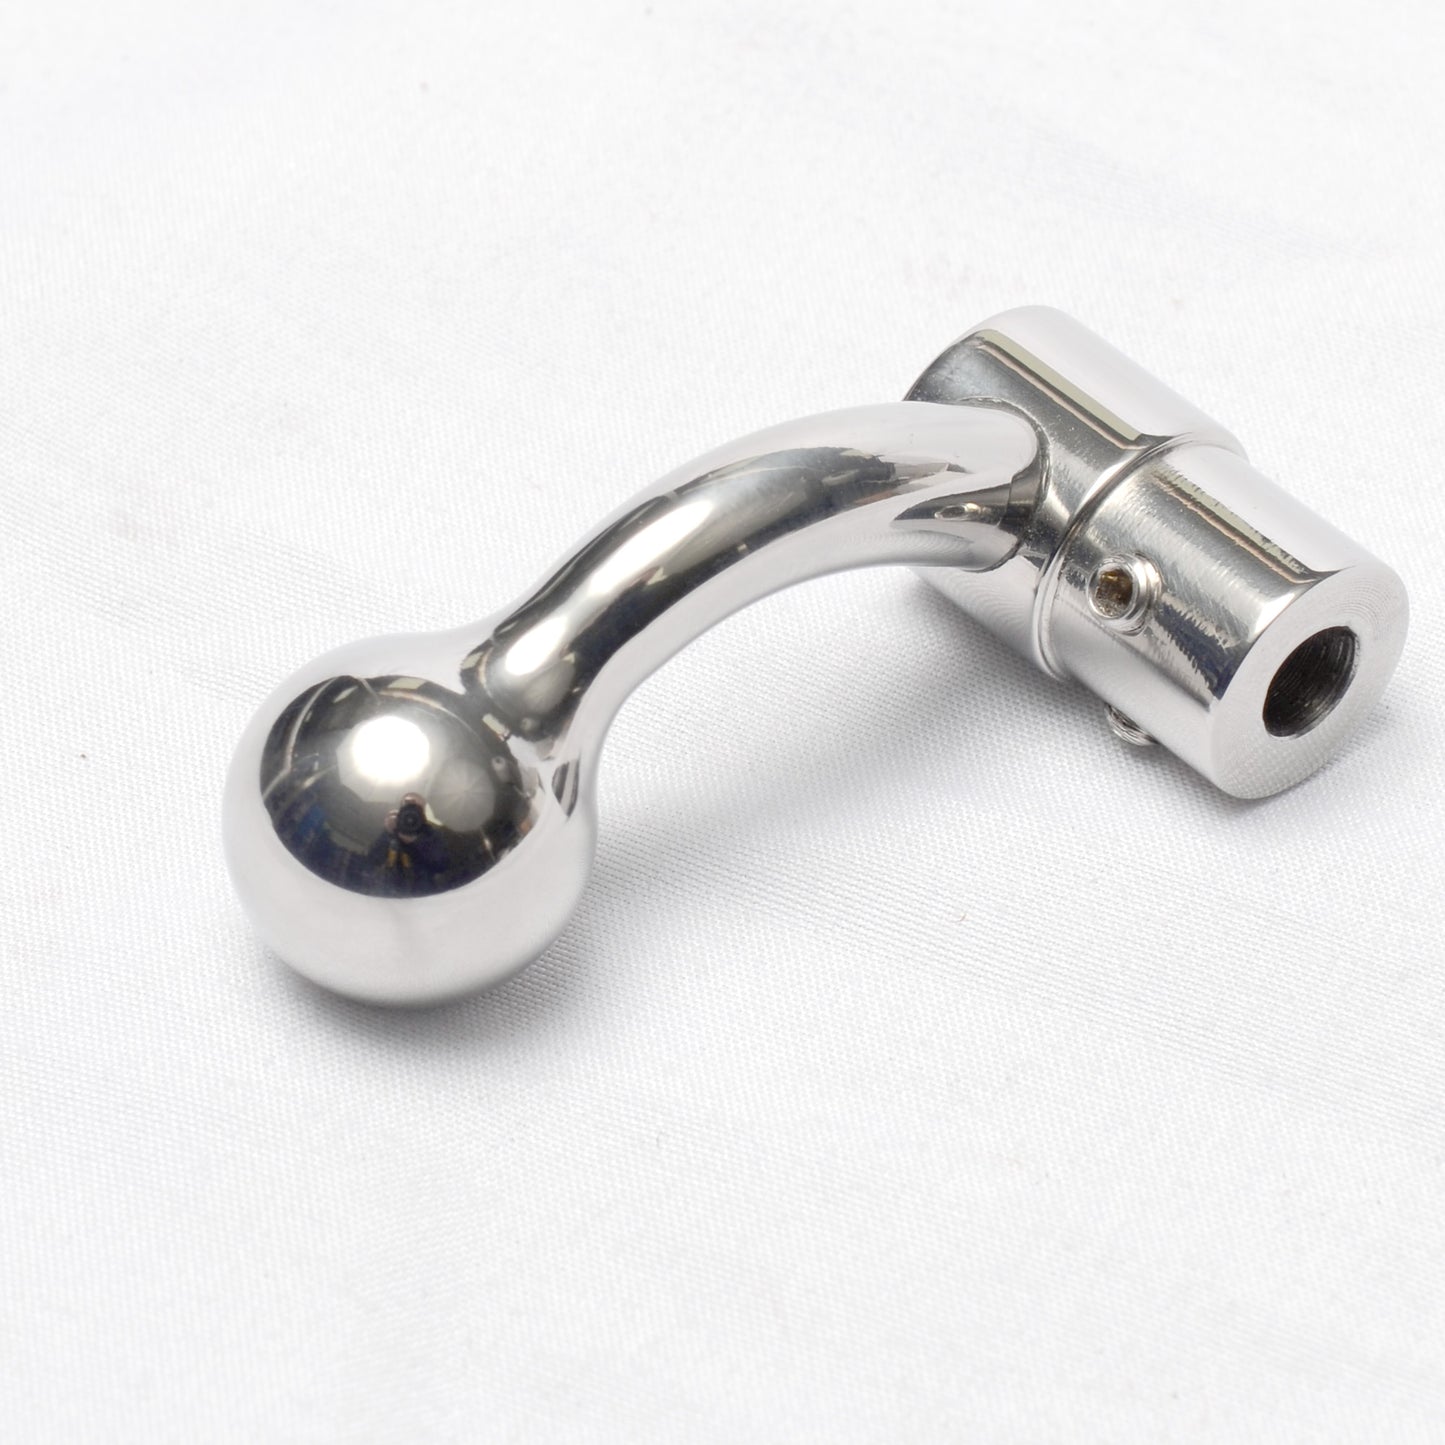 Daystate Bolt Handle. 6.3mm dia. mounting